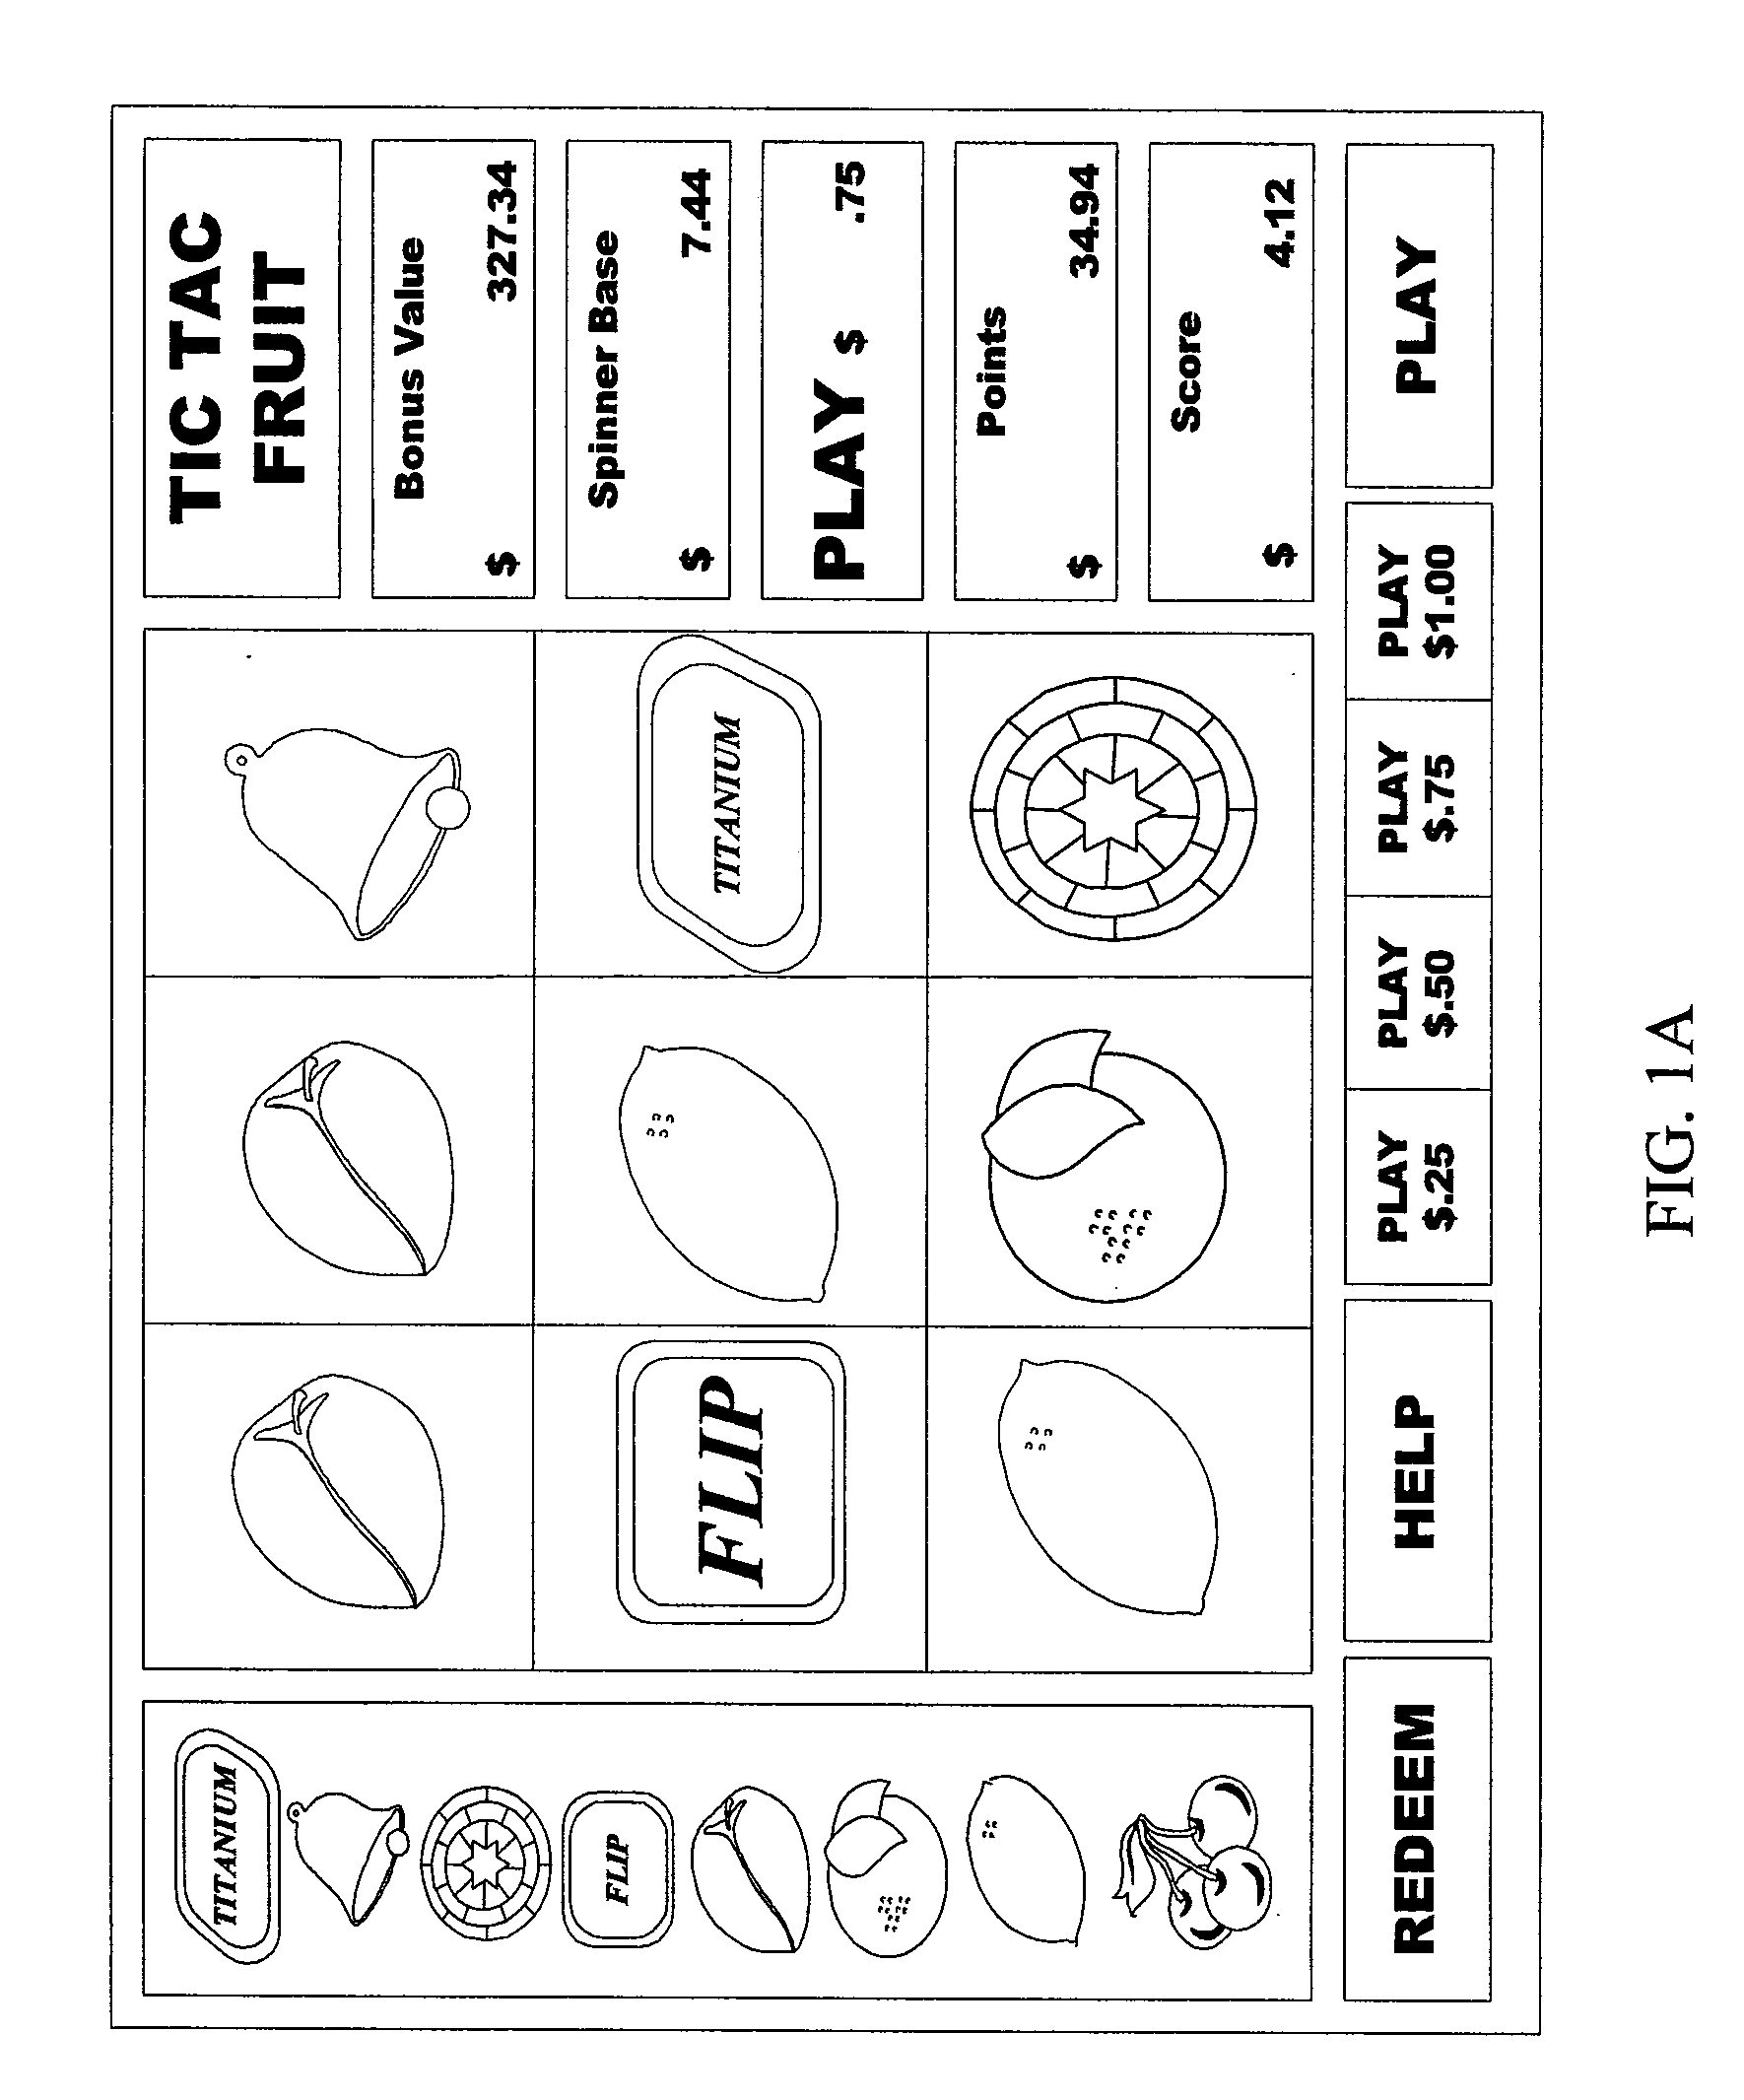 System and Method for Securely Controlling Operation and Configuration of an Electronic Game Having Virtual Refills